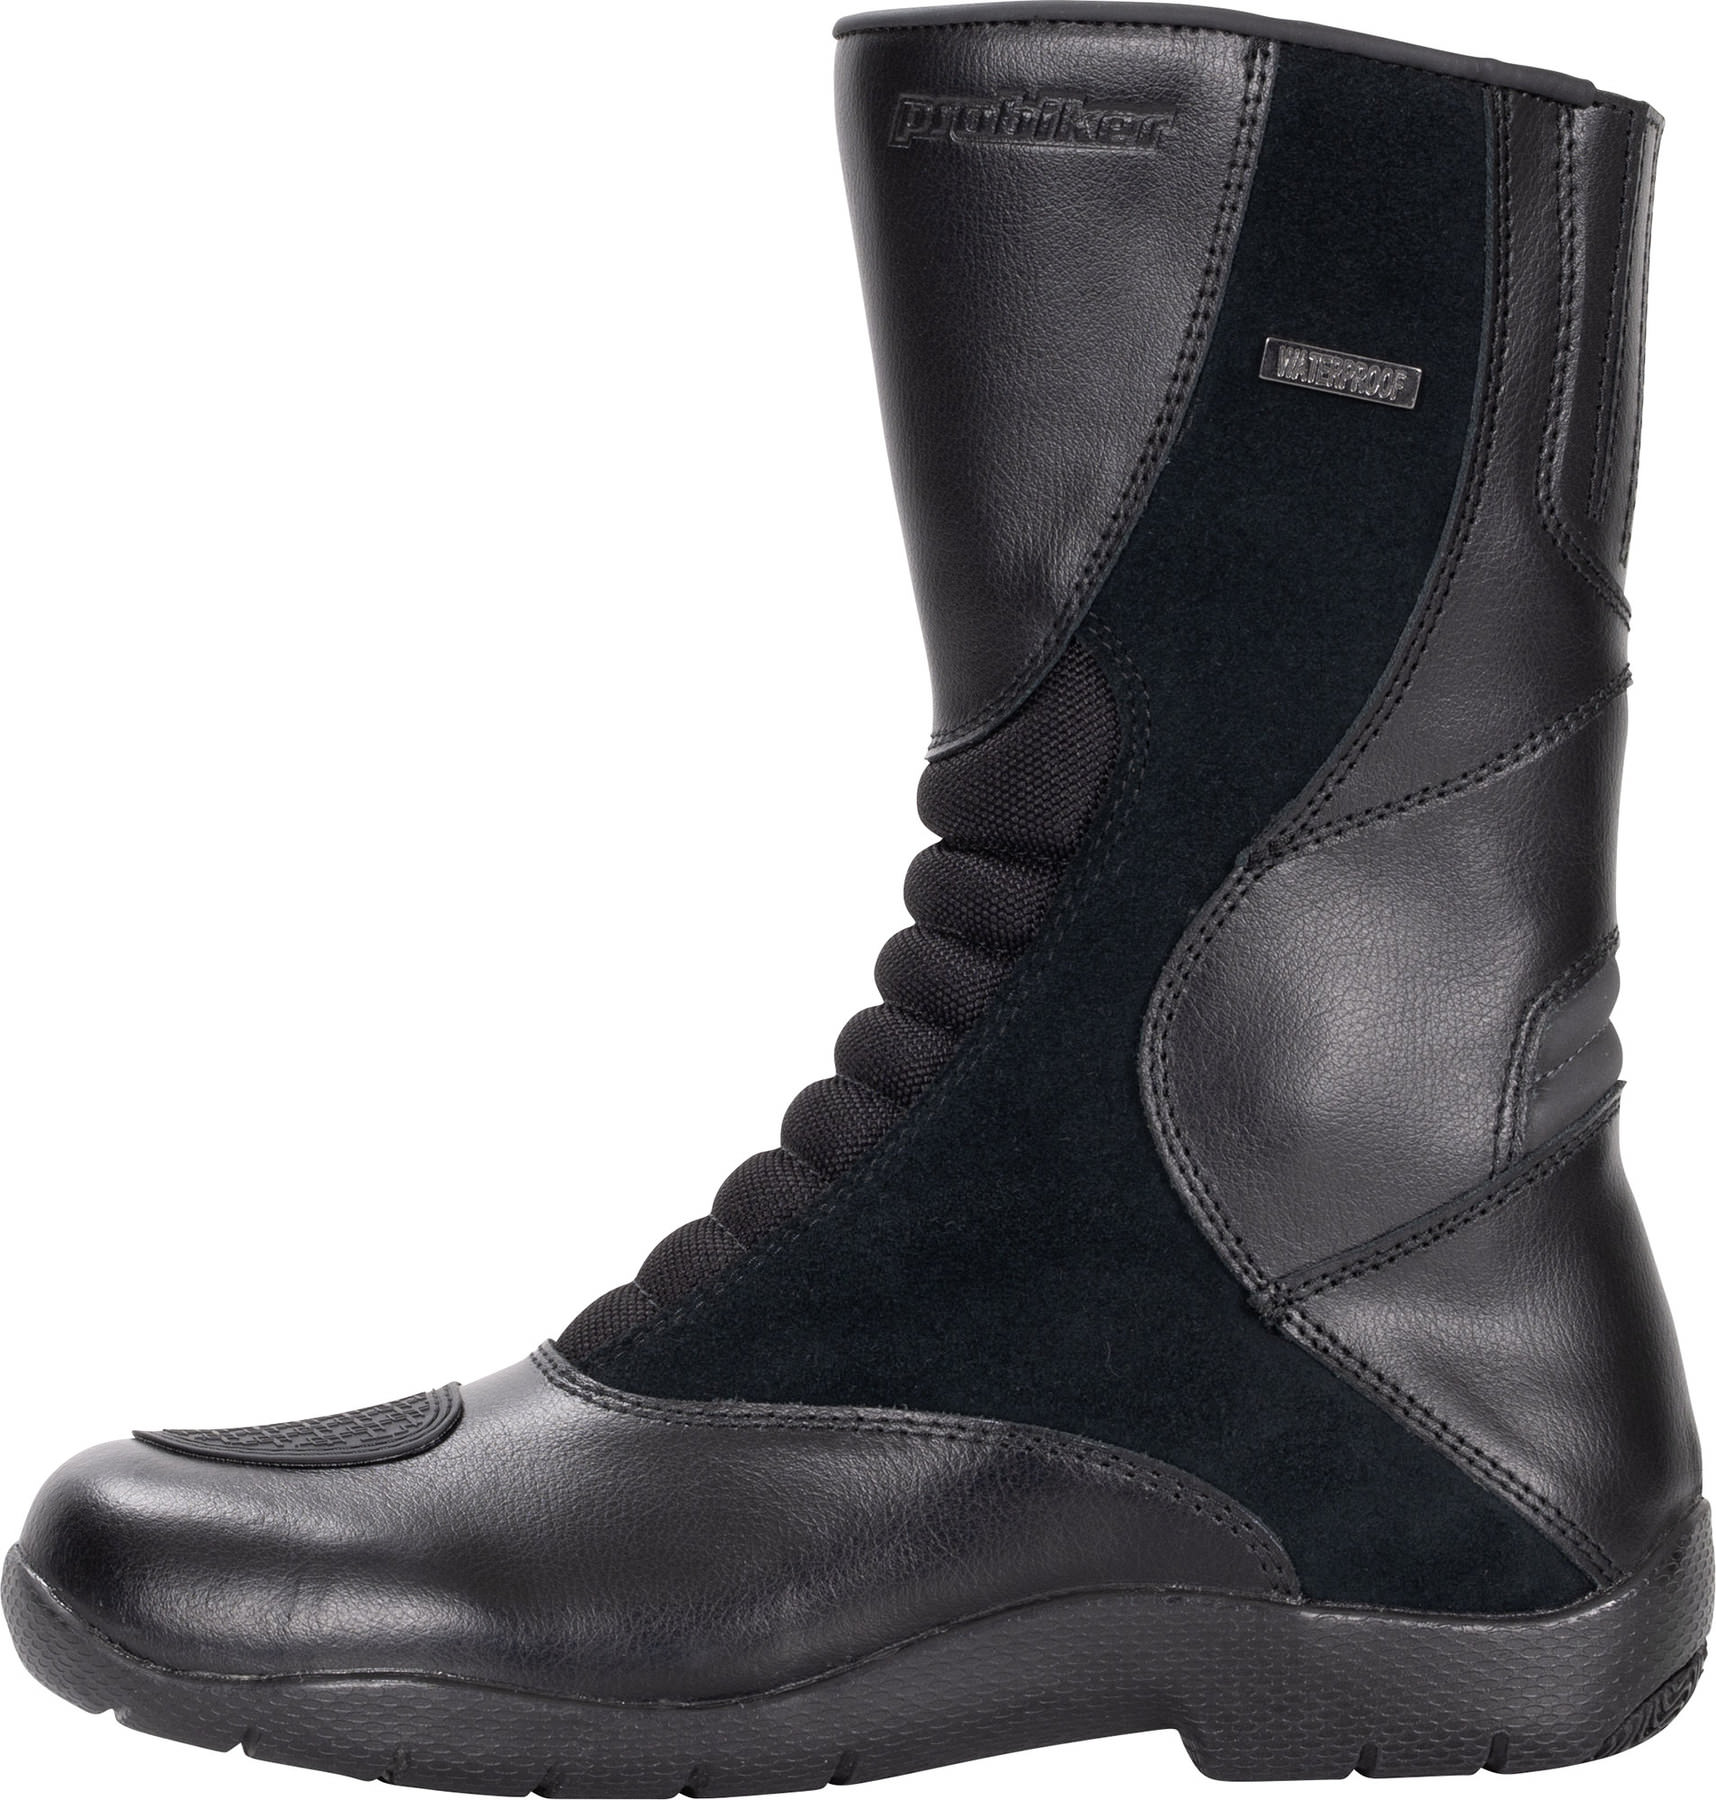 Oxford Cherokee Motorcycle Leather Touring Waterproof Boots Black CLEARANCE T